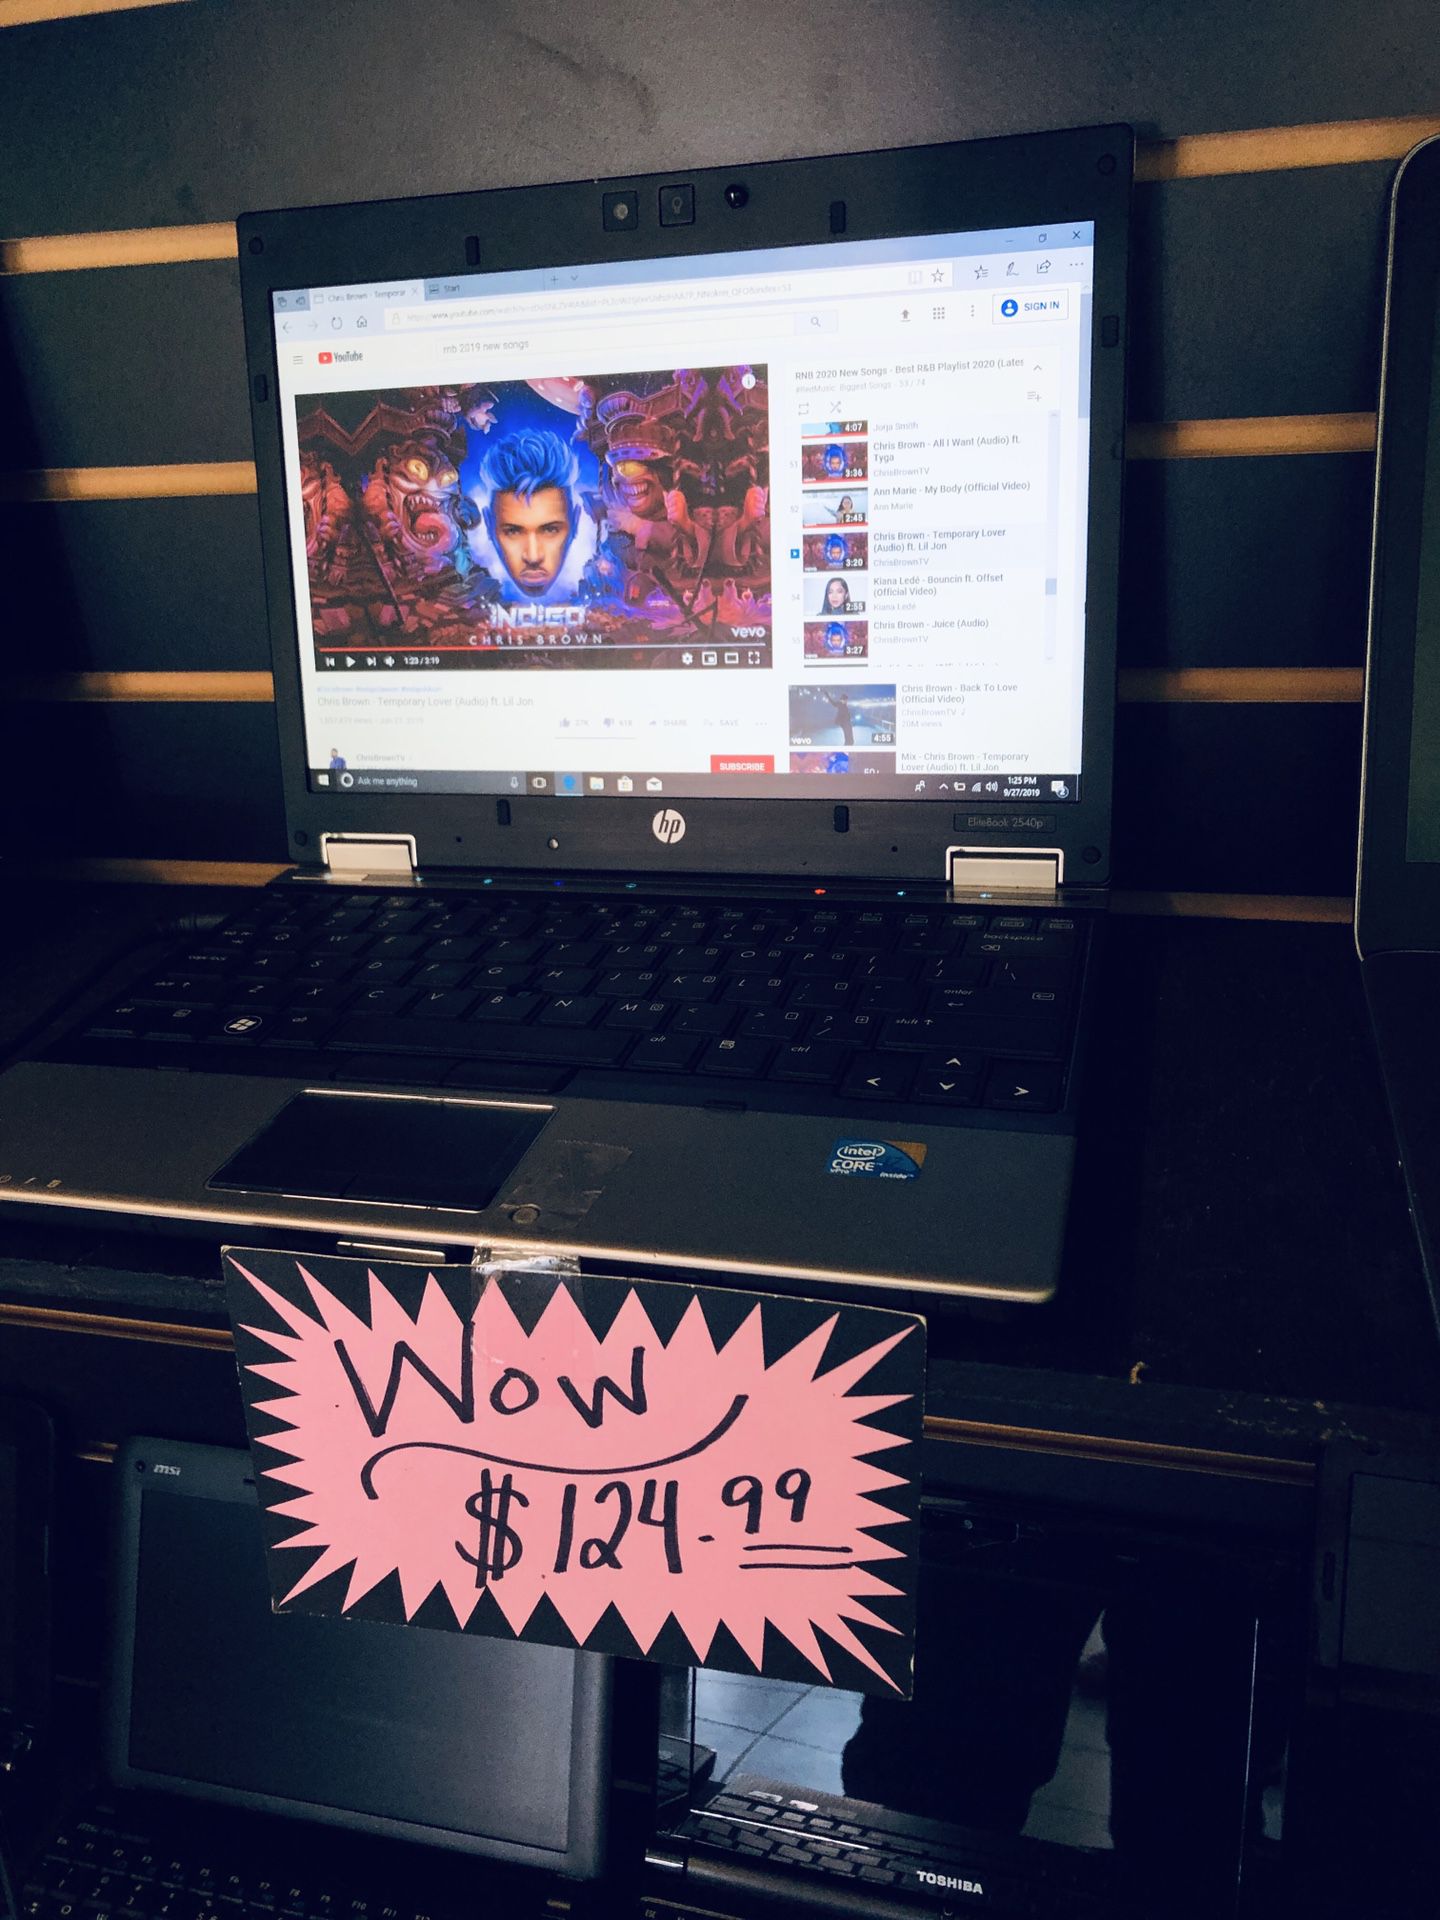 i7 laptop for only $125 #wow